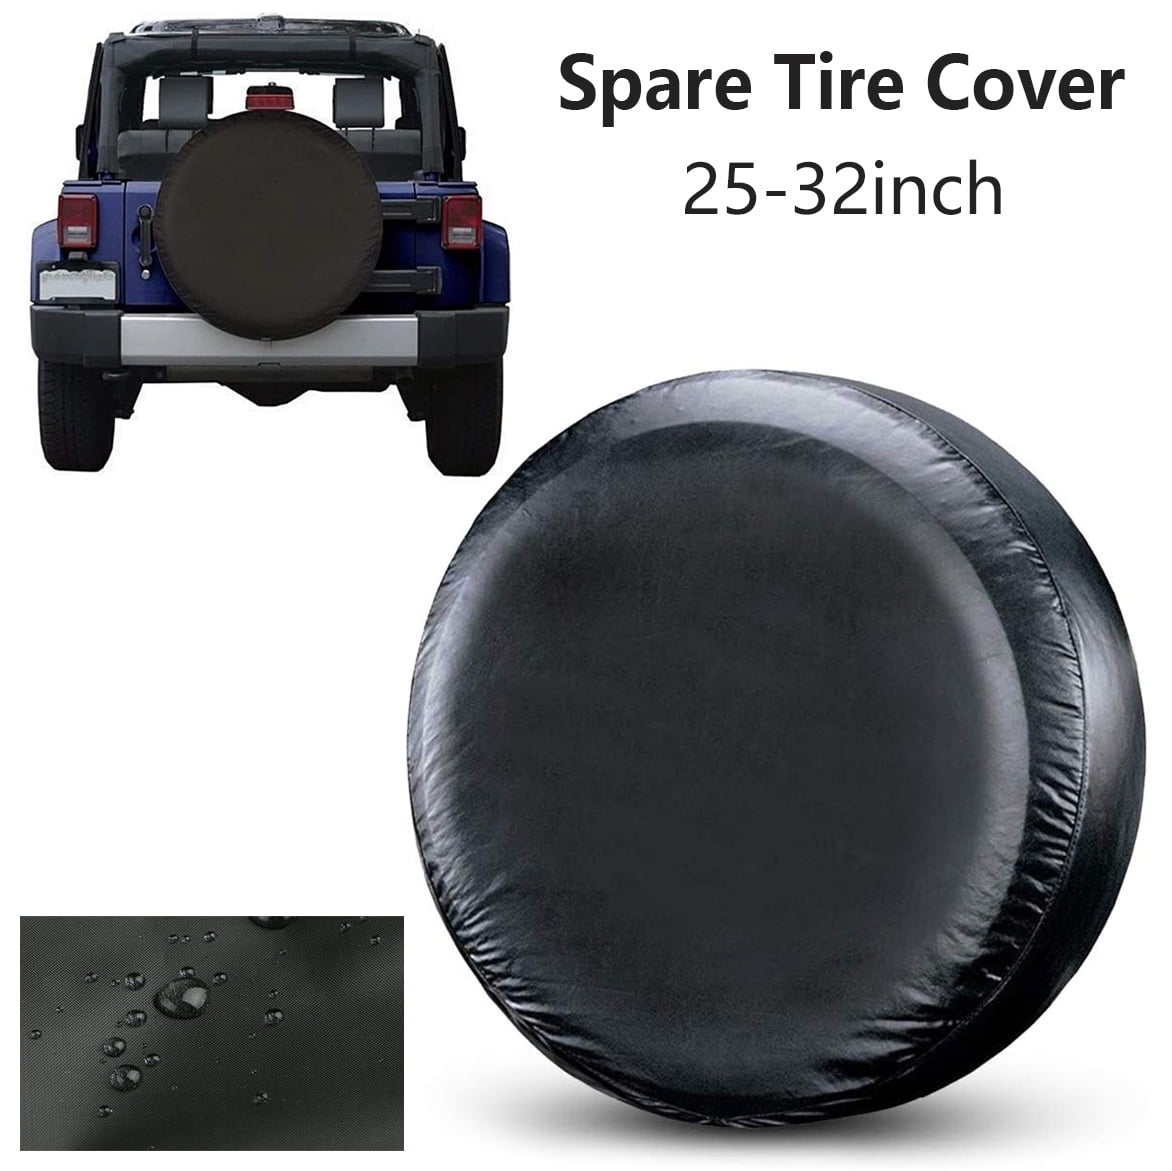 Heavy Duty Waterproof PVC Tire Protectors with Cotton Lining for Trailer Camper Truck Auto Gray Fits 24”- 26.5 Tire Diameters RVMasking Tire Covers 4 Pack 